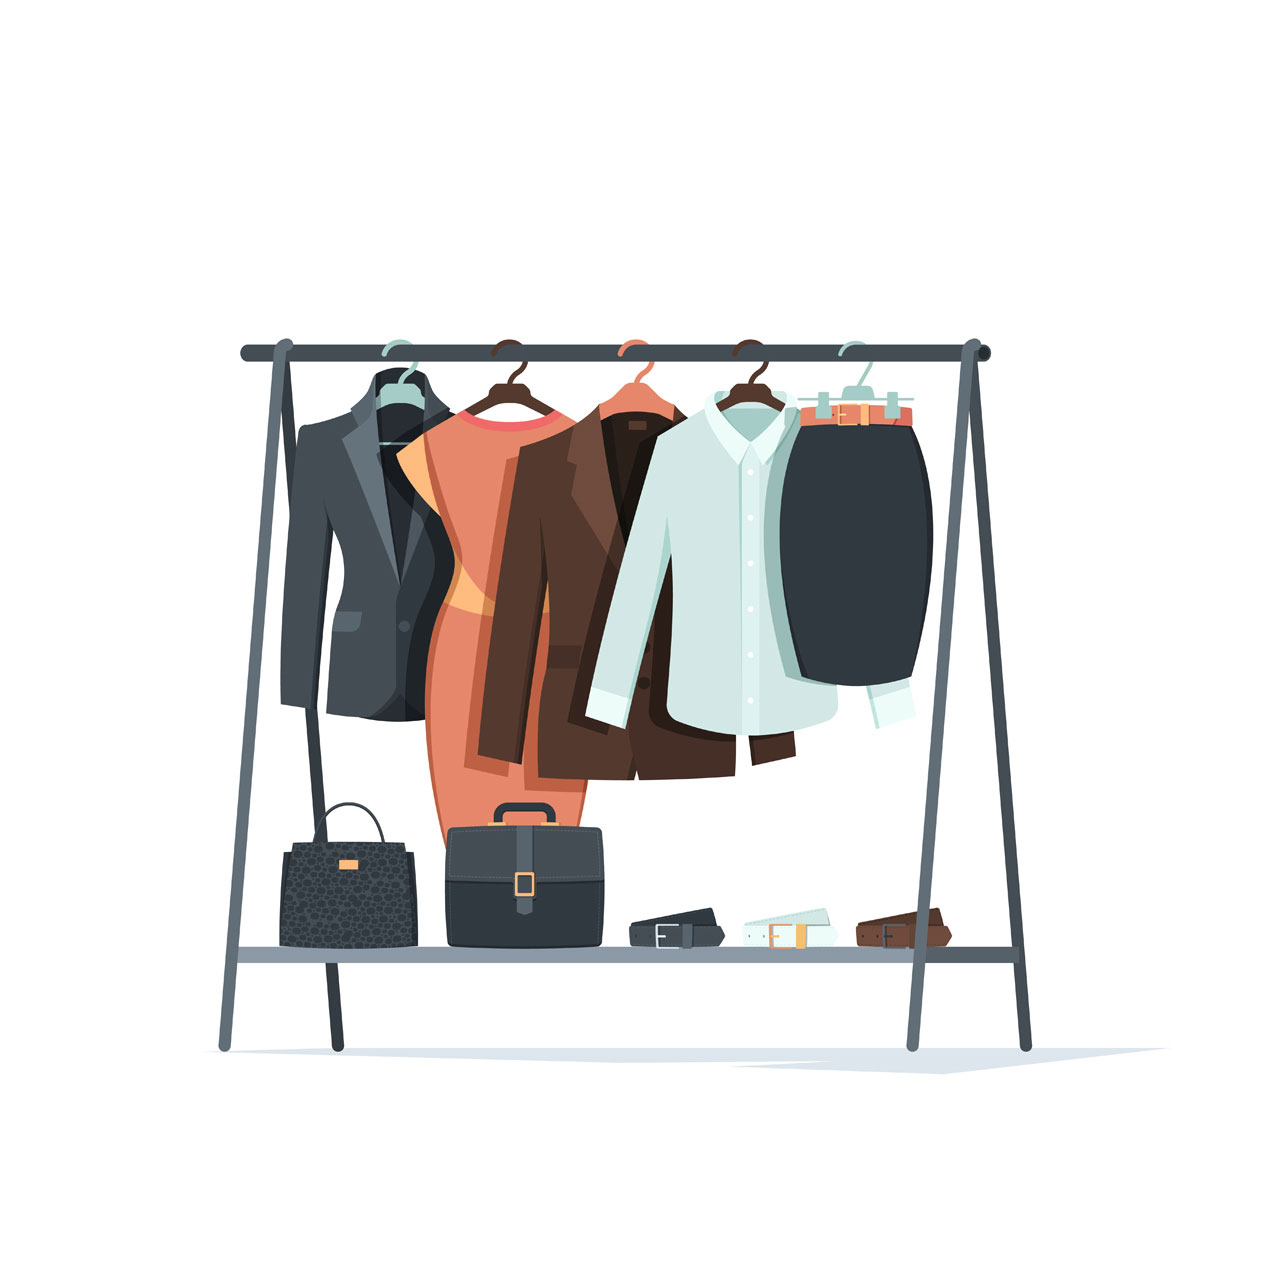 Wardrobe clipart clothes hangers business textile things male female persons dresses shirts pants suits hangs